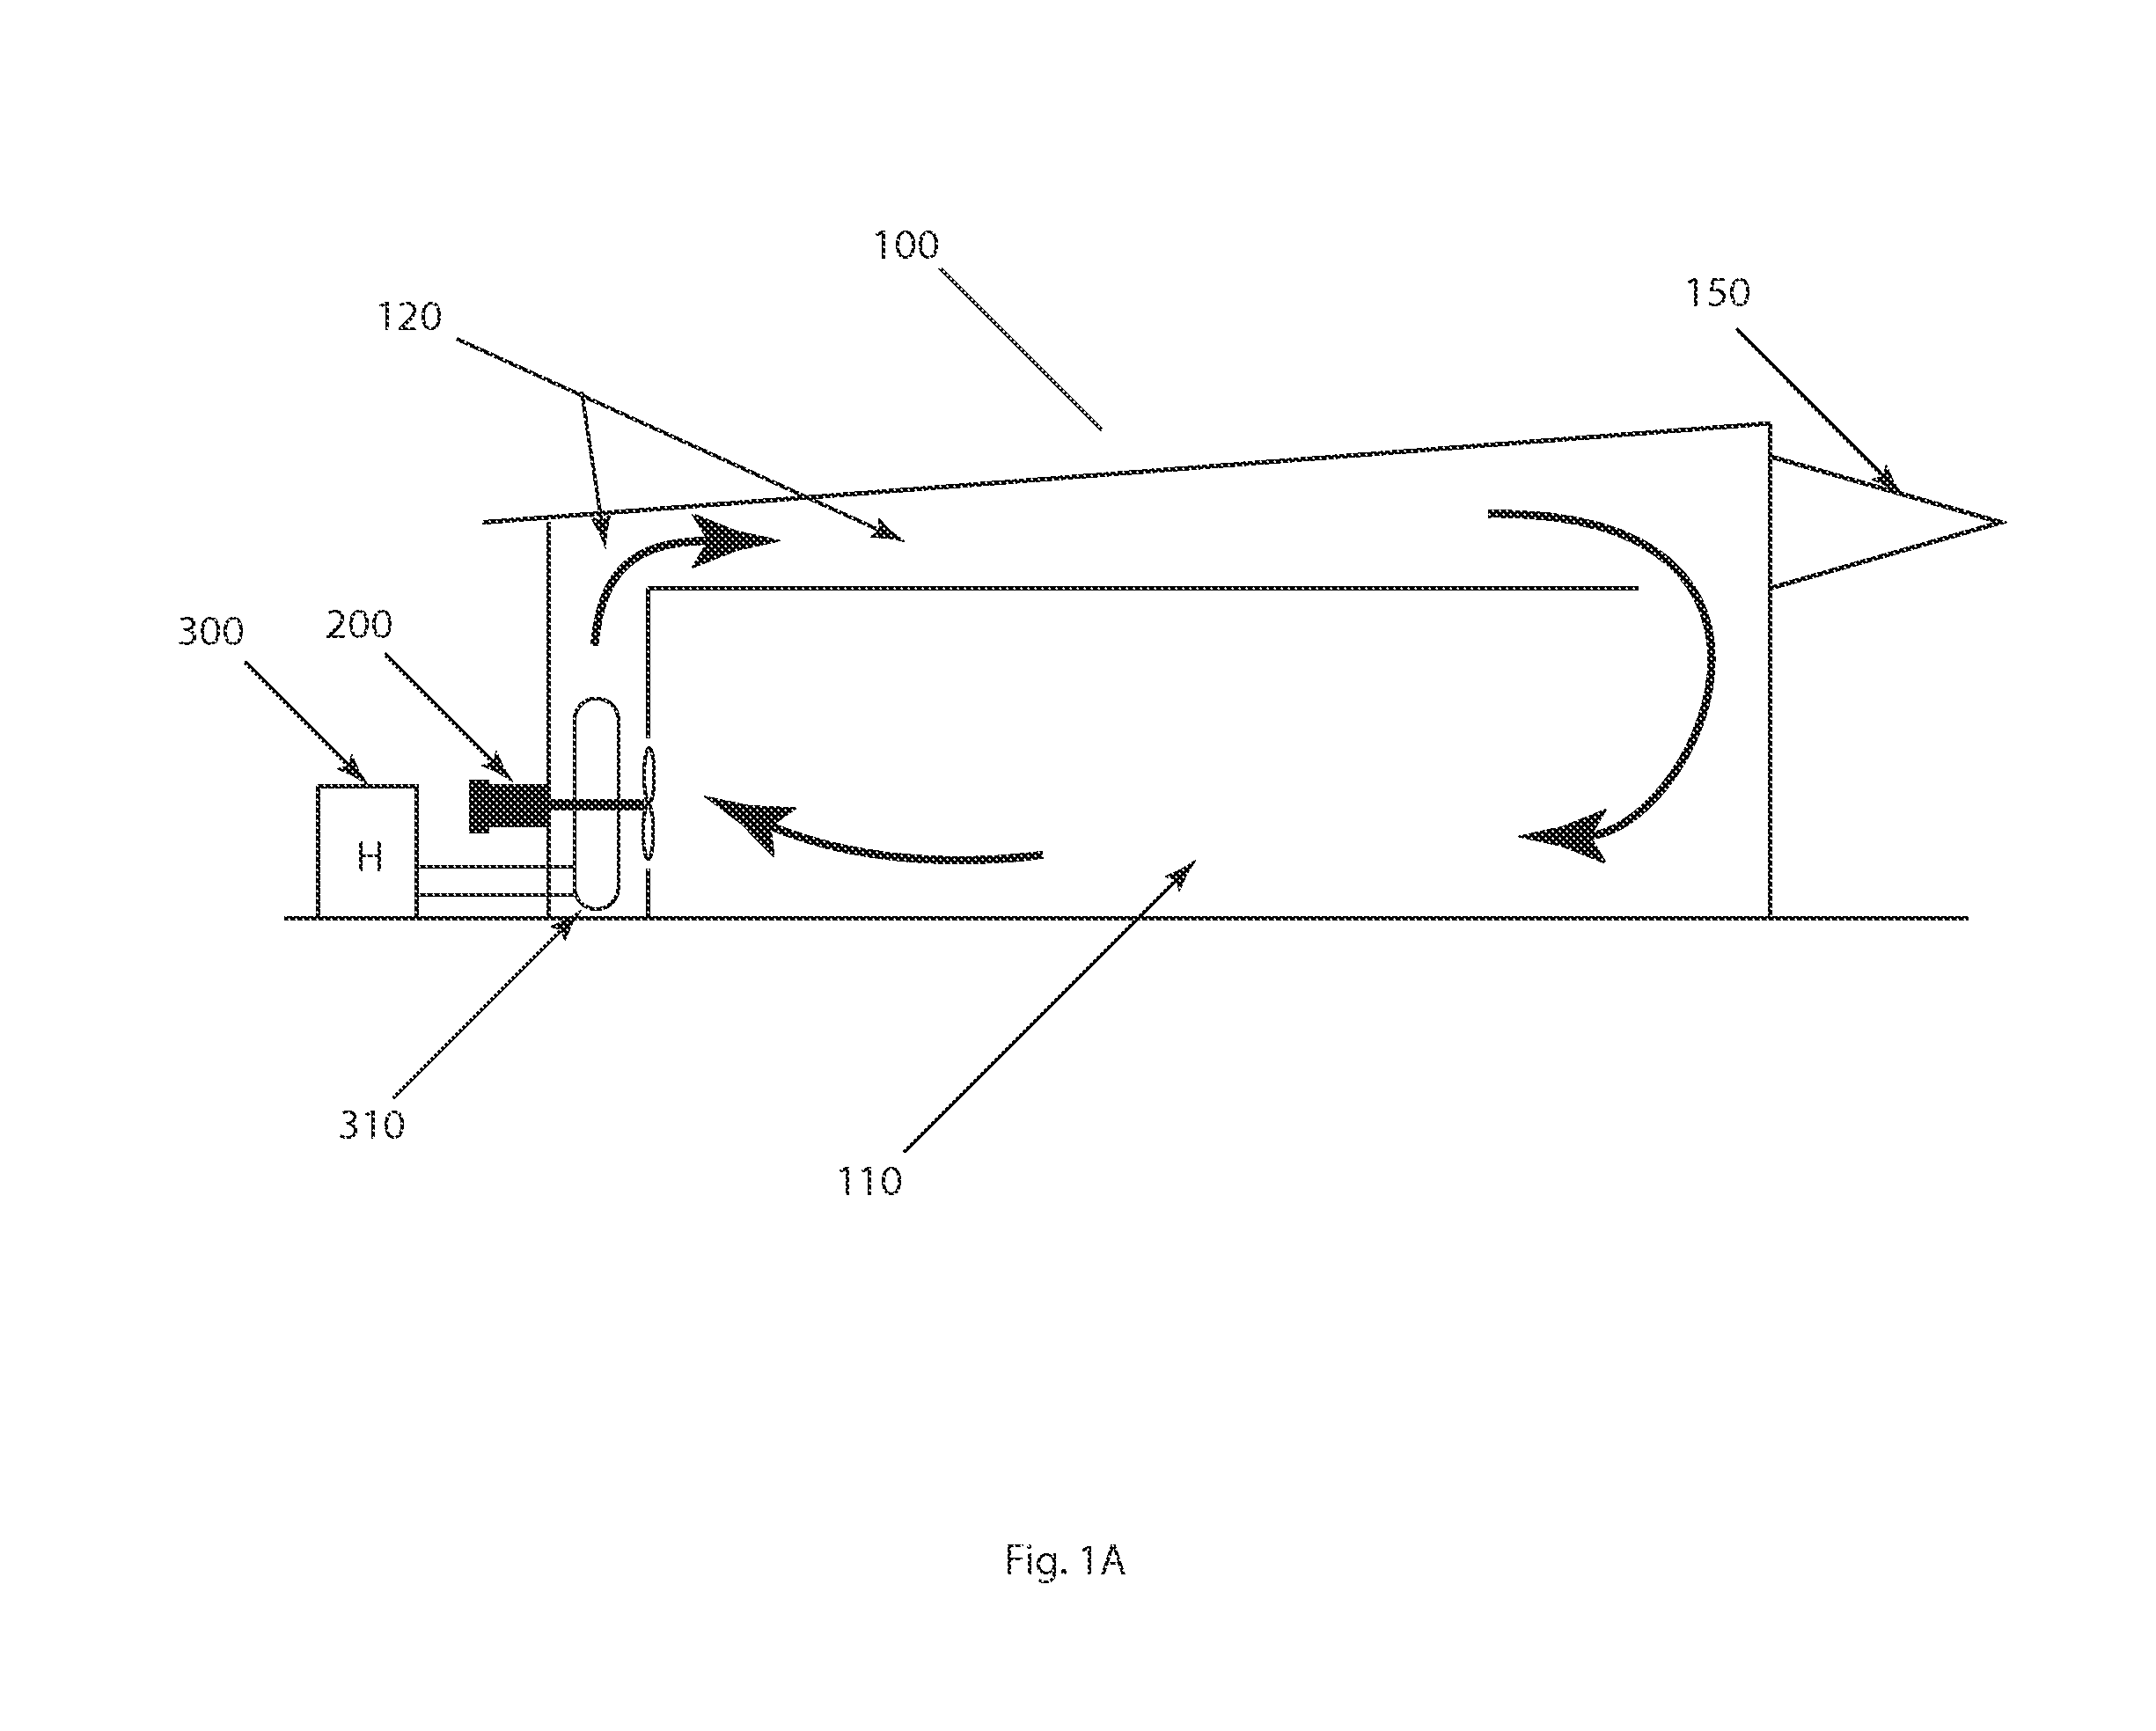 Modified heat chamber and method to improve heat cycle efficiency using airflow control